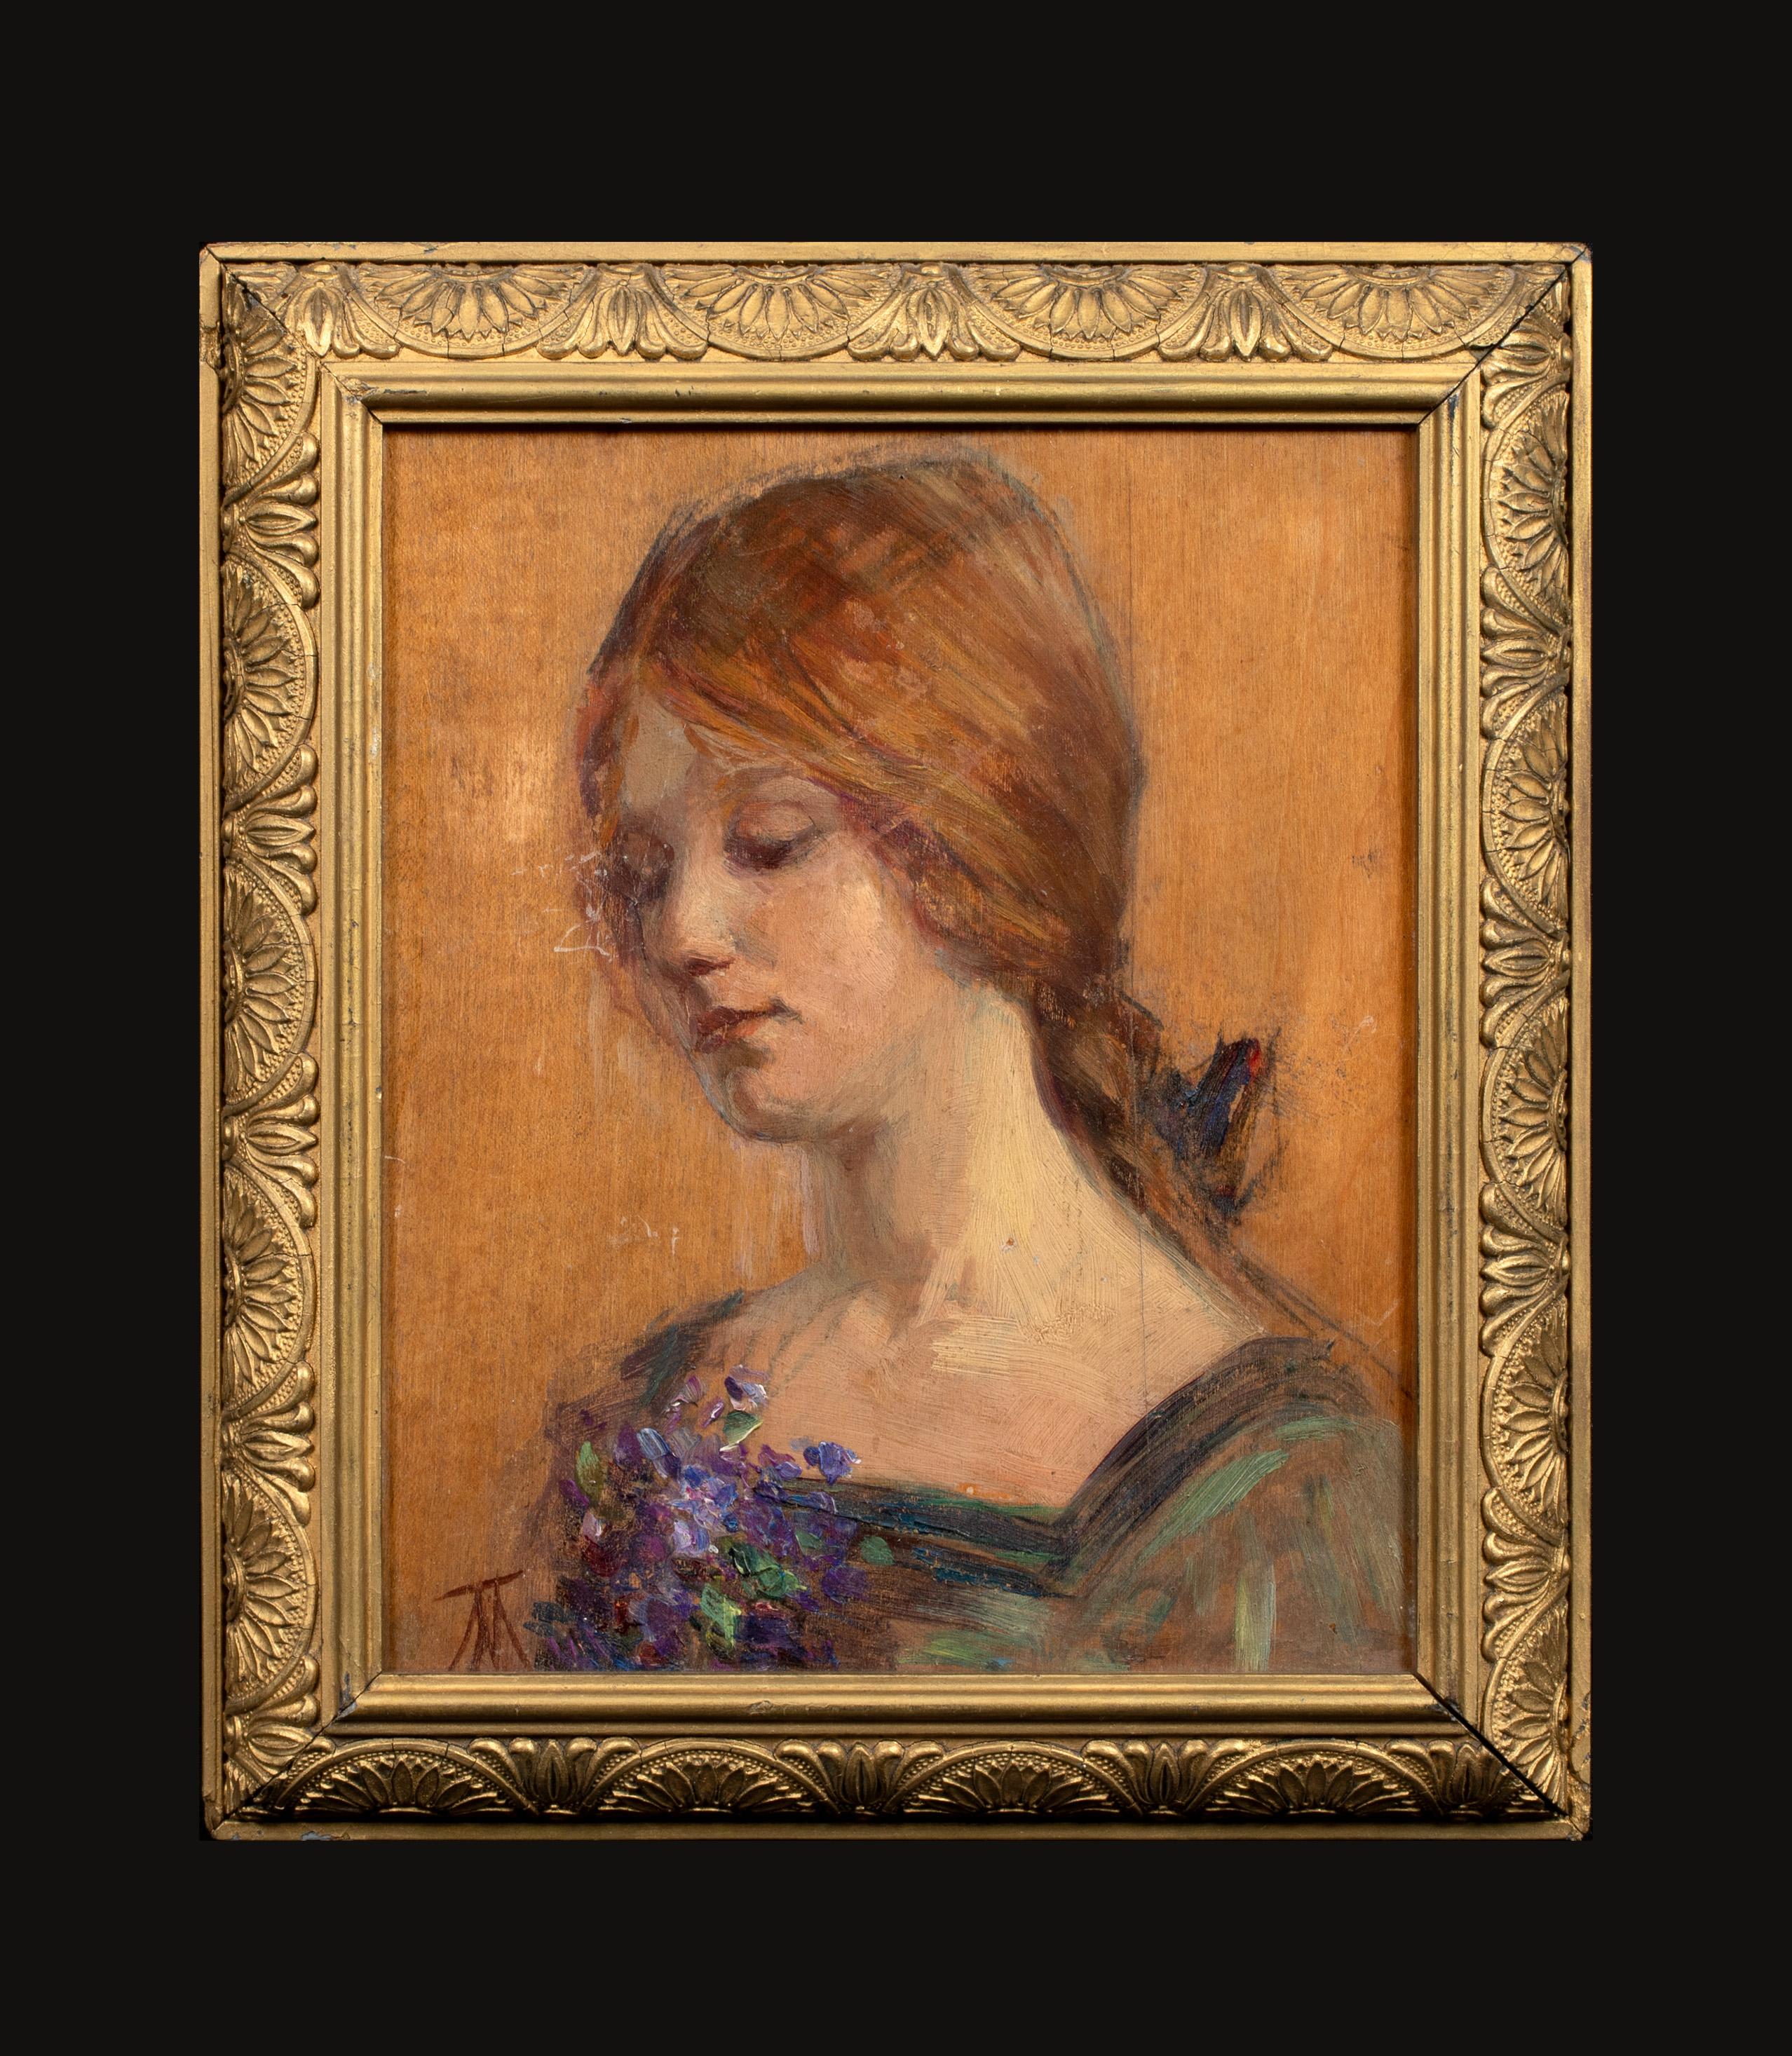 Portrait Of A Red Haired Holding Flowers, circa 1900 - Painting by Unknown